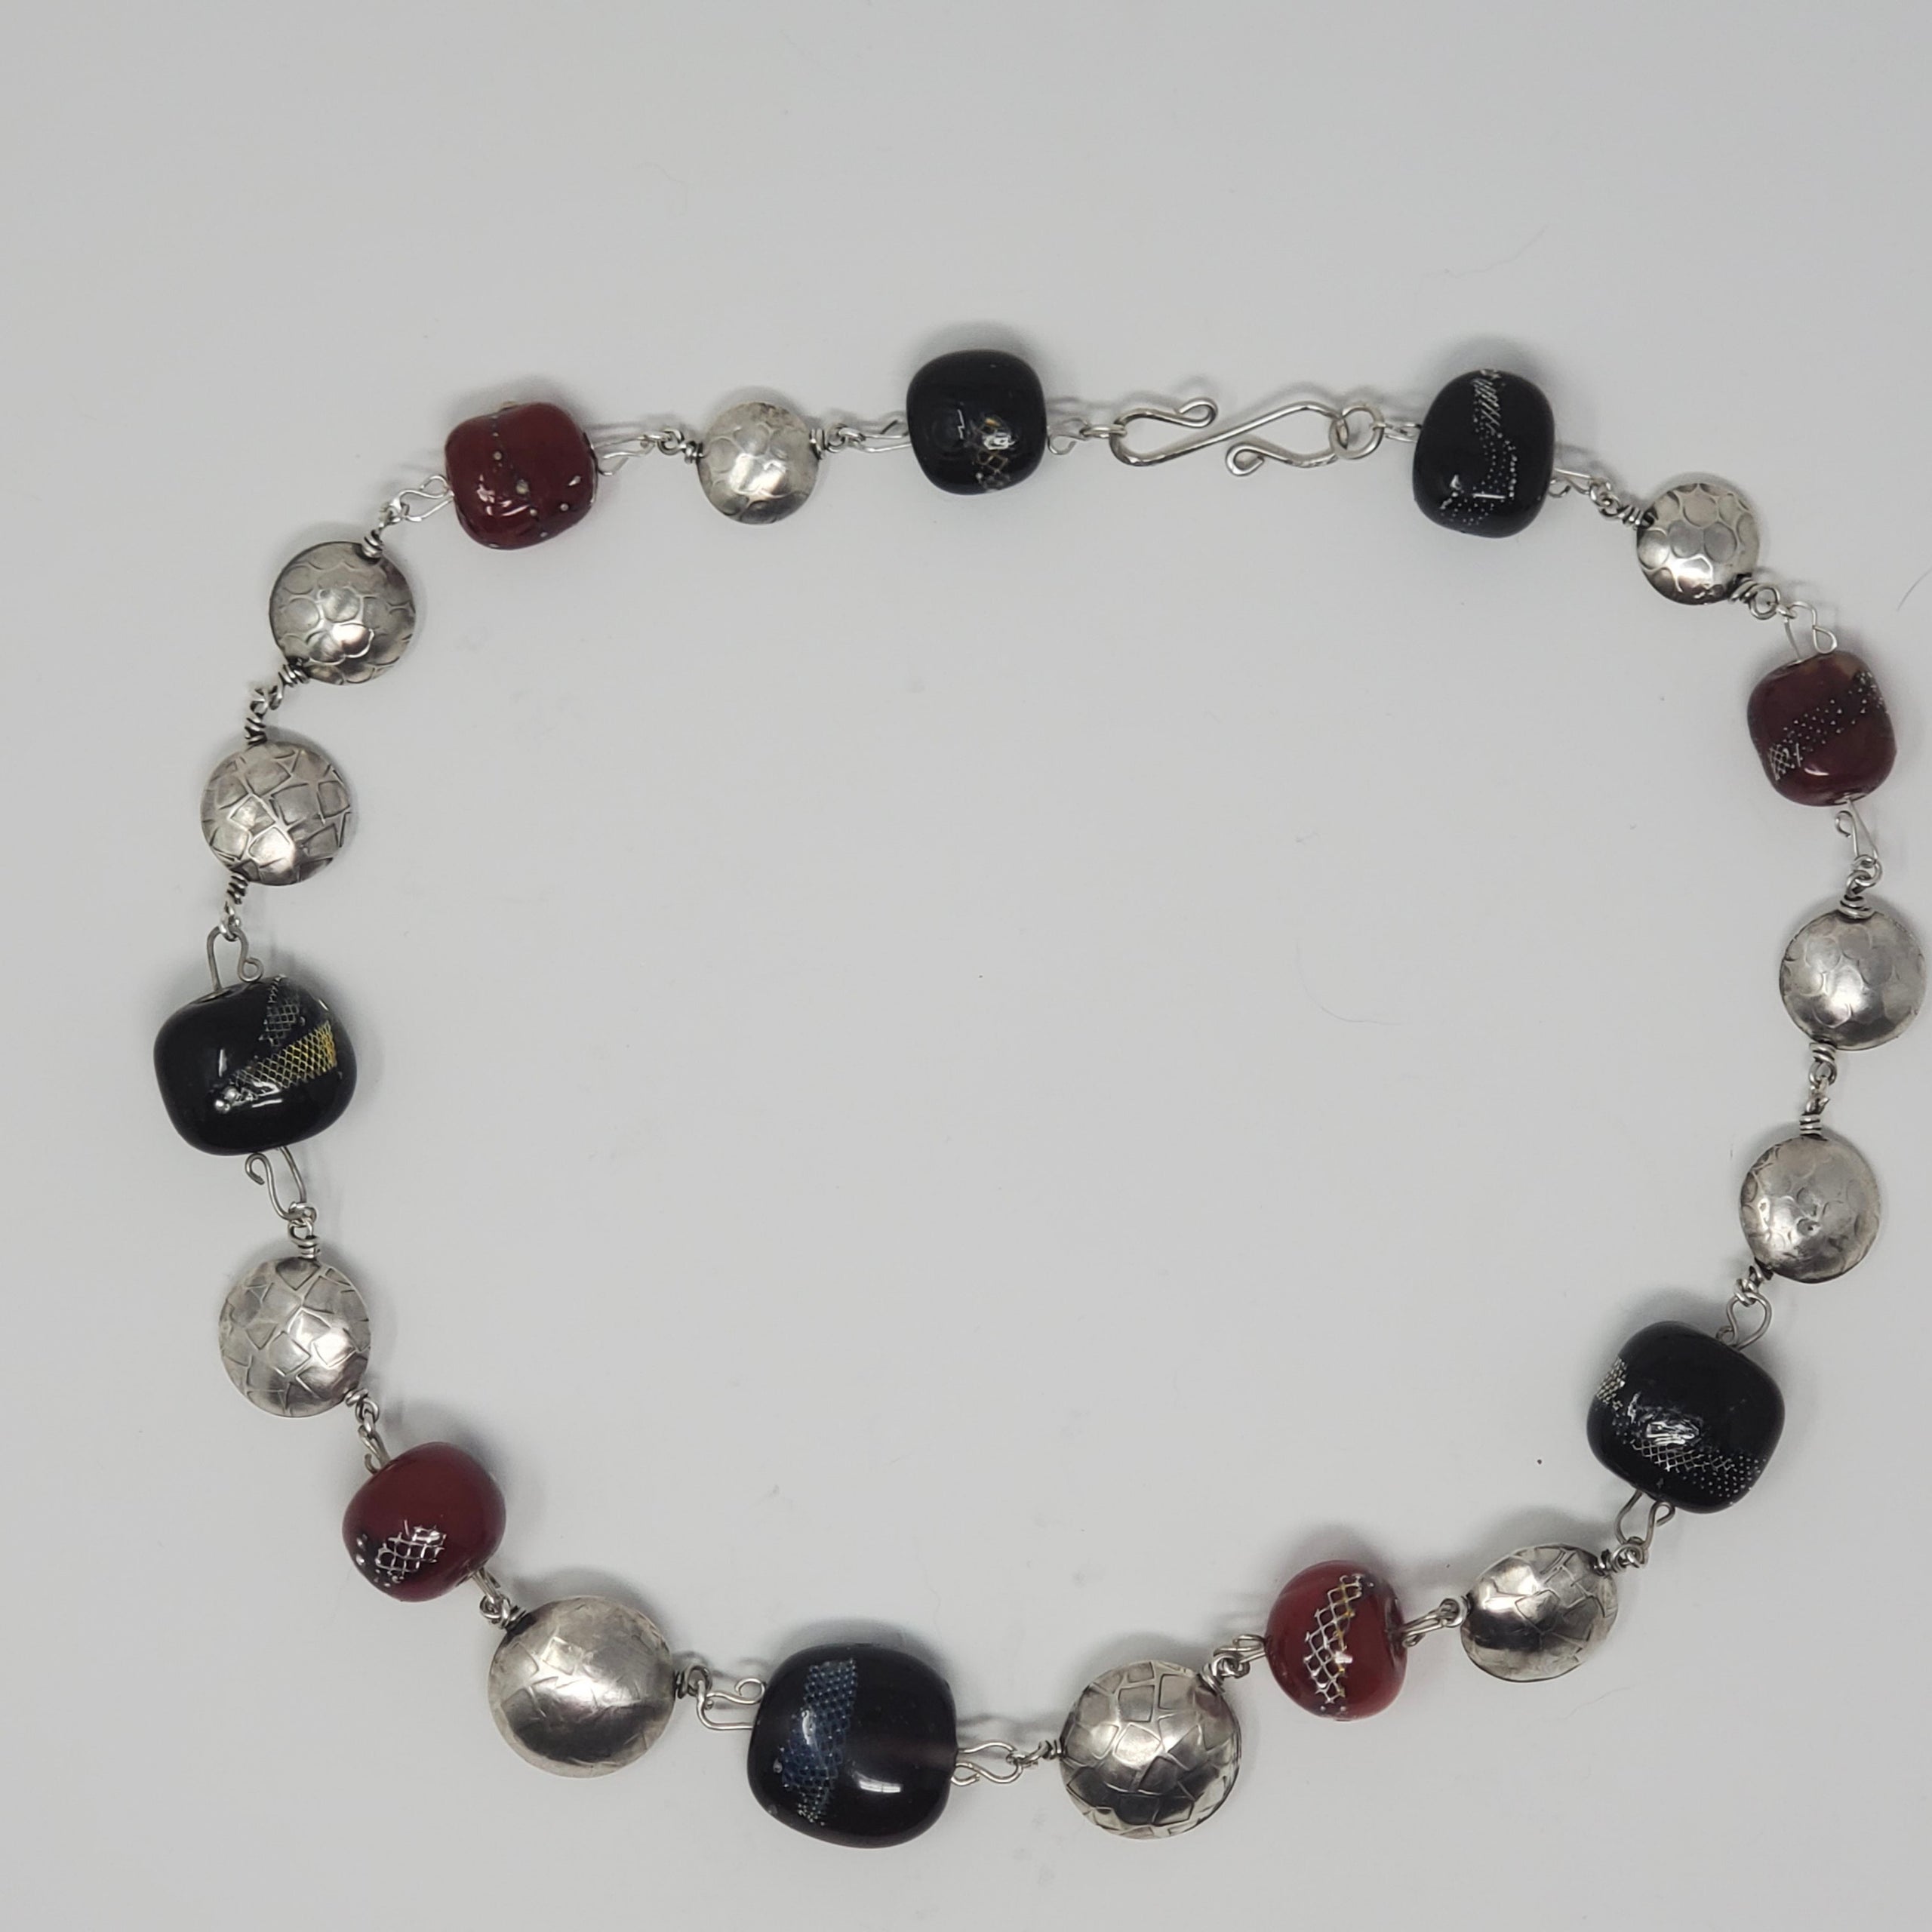 Black, Red, and silver Beads